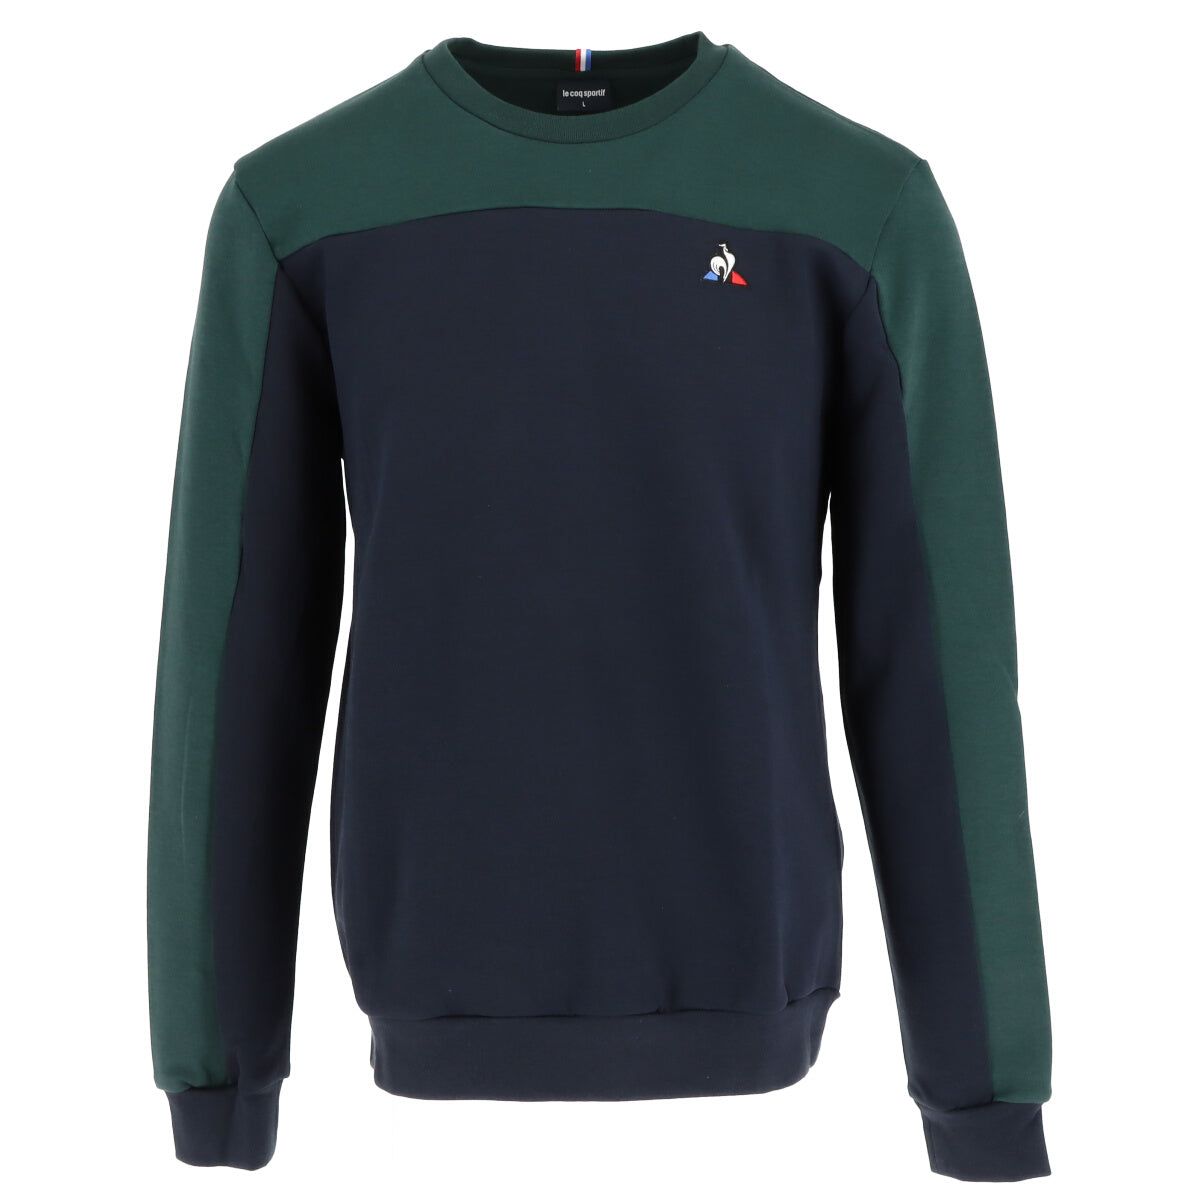 Brand: Le Coq Sportif Gender: Men Type: Knitwear Season: All seasons  PRODUCT DETAIL • Color: blue • Pattern: coloured • Sleeves: long • Neckline: round neck •  Article code: 2011140  COMPOSITION AND MATERIAL • Composition: -85% cotton -15% polyester  •  Washing: machine wash at 30° -85% Cotton -15% Polyester